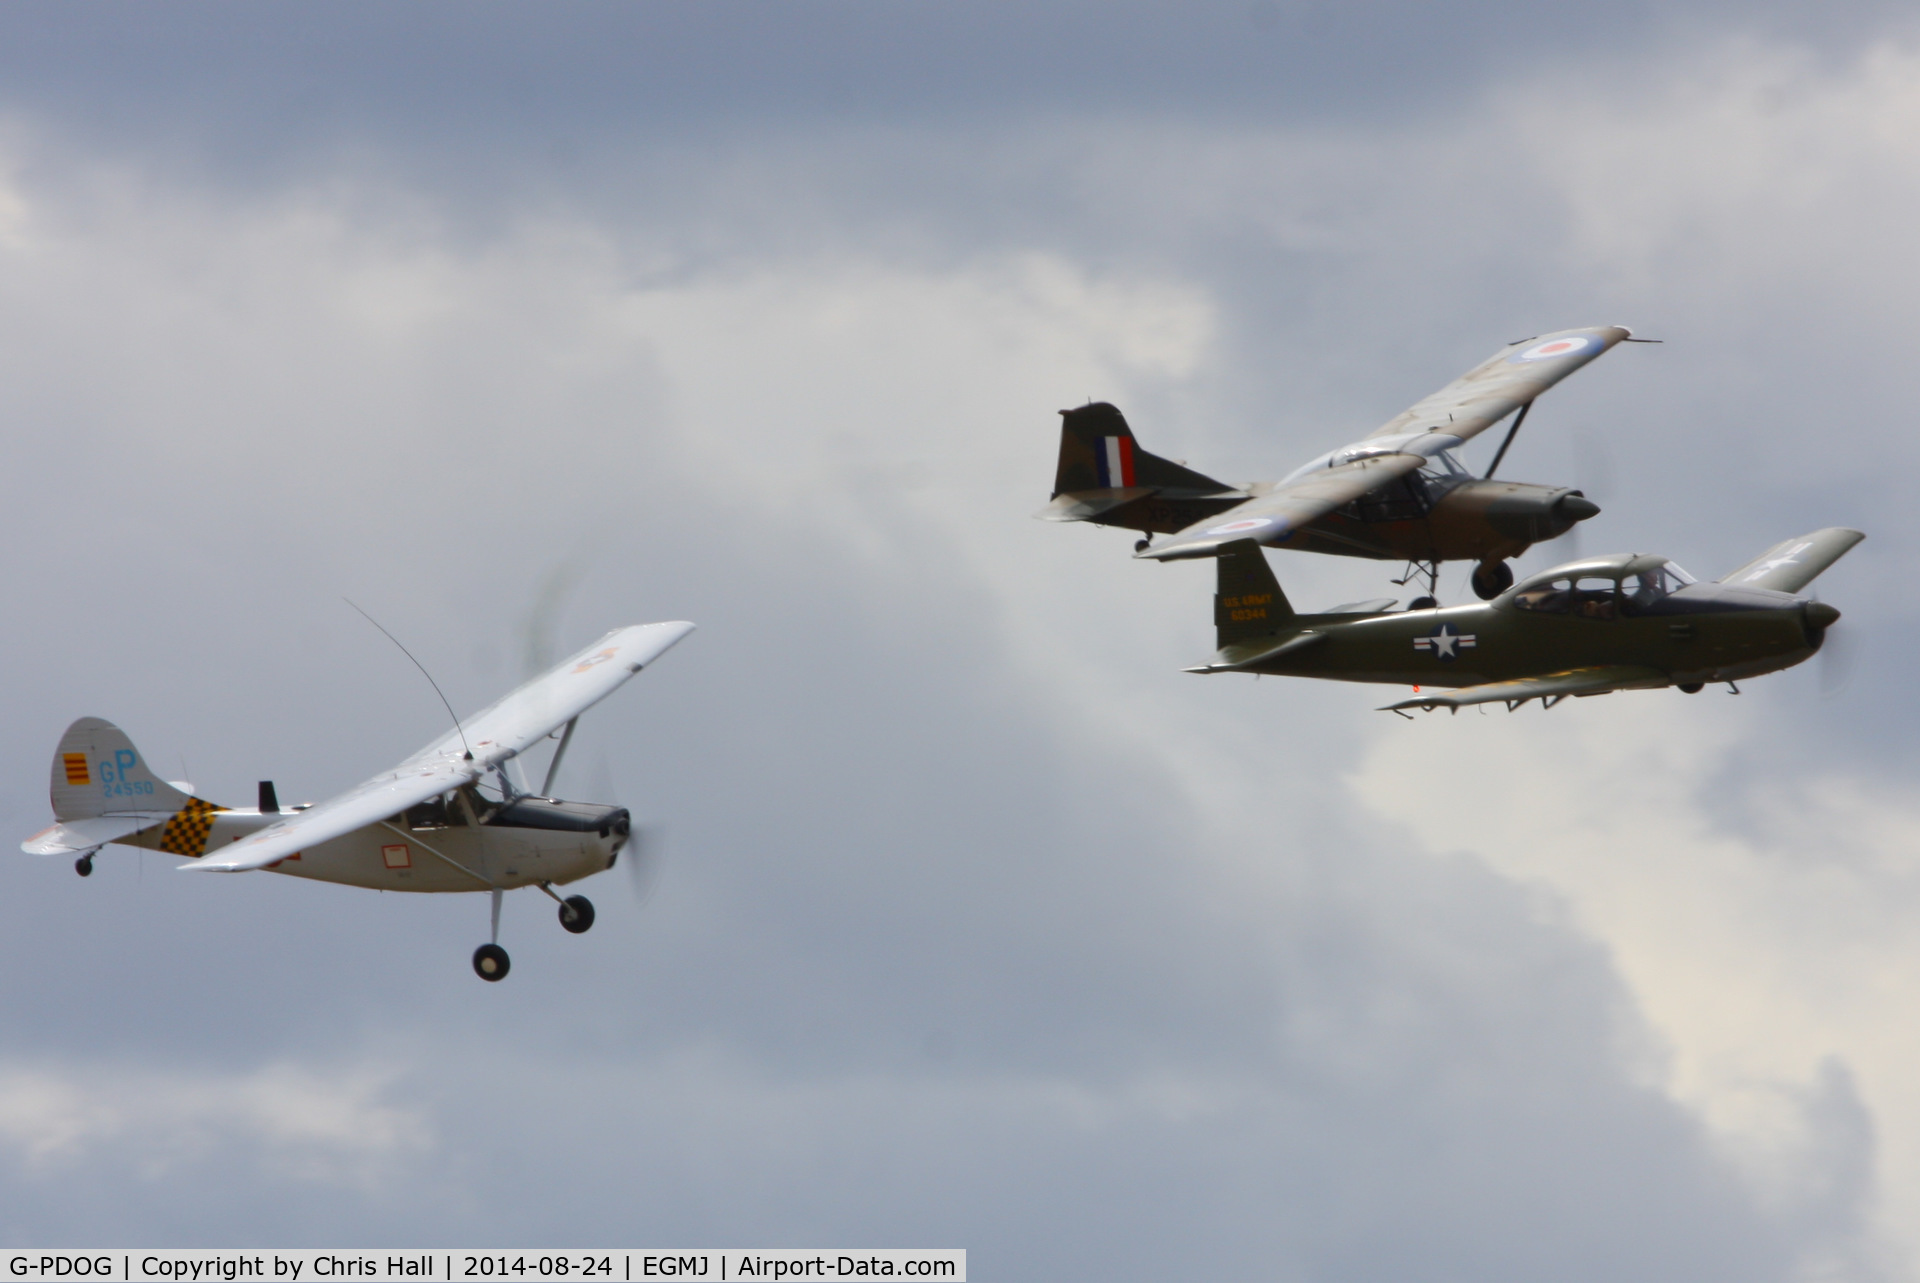 G-PDOG, 1957 Cessna 305C C/N 24550, in formation with G-ASCC and N4956C at the Little Gransden Airshow 2014